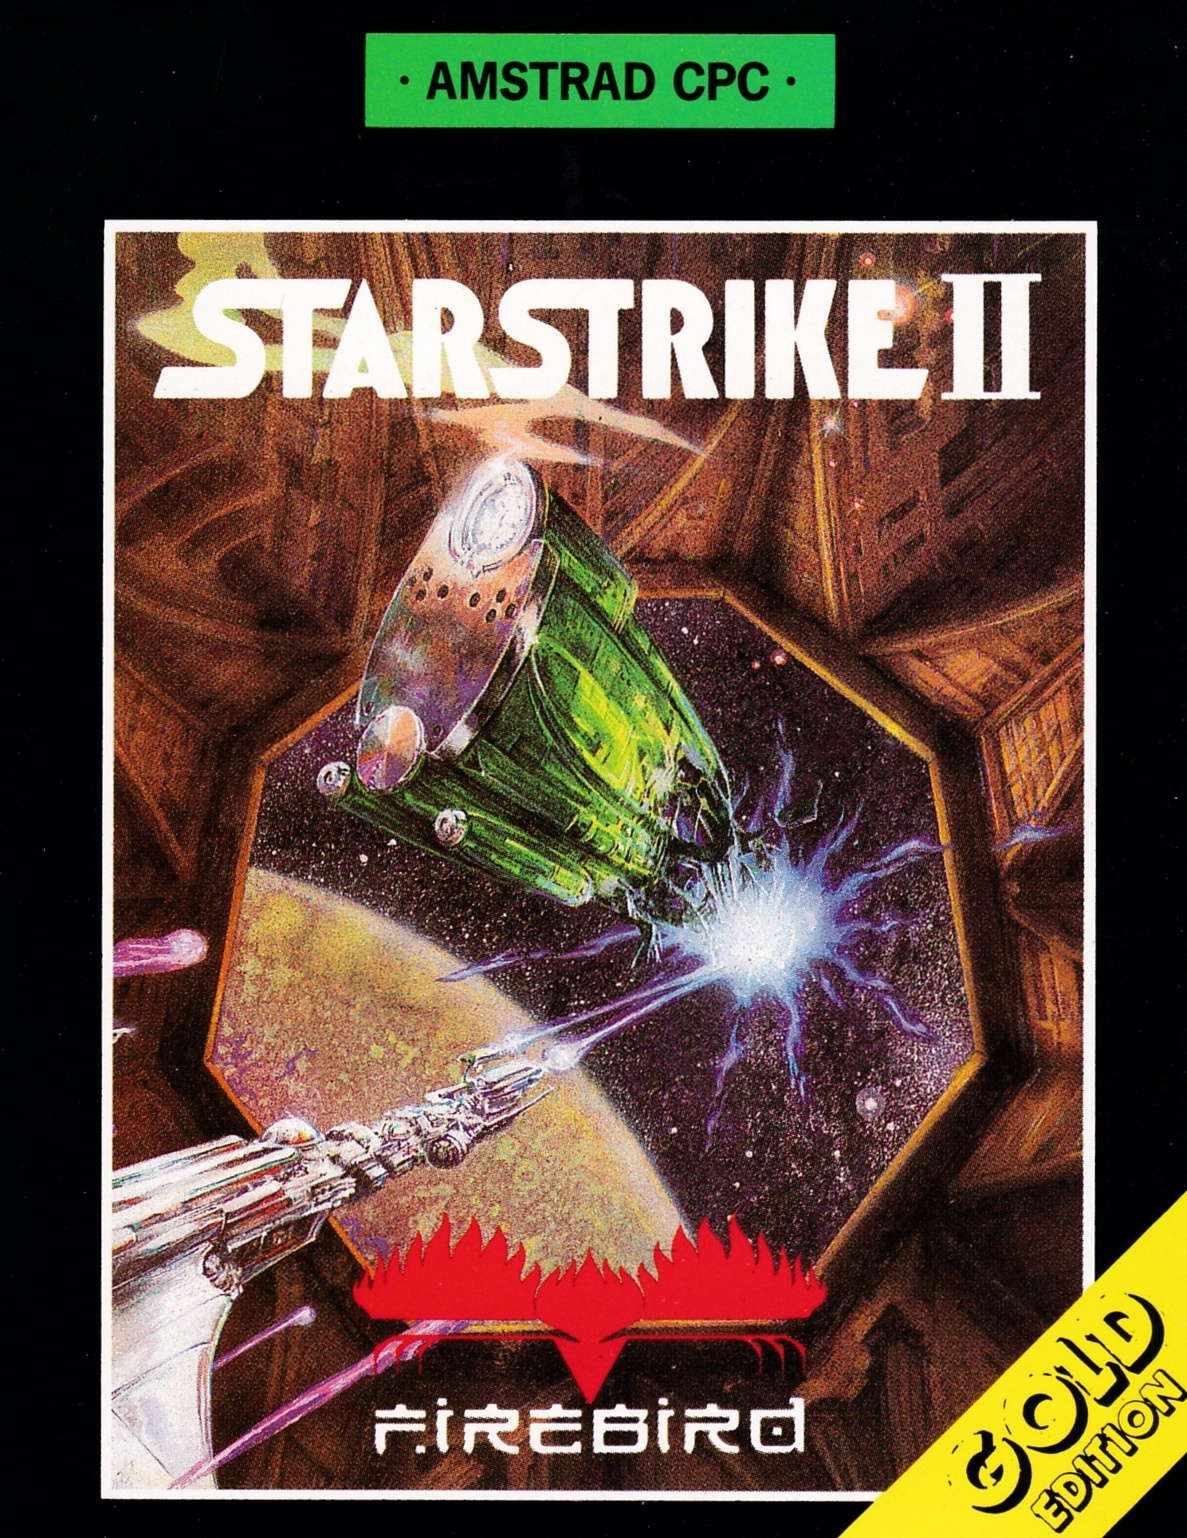 cover of the Amstrad CPC game Starstrike II  by GameBase CPC